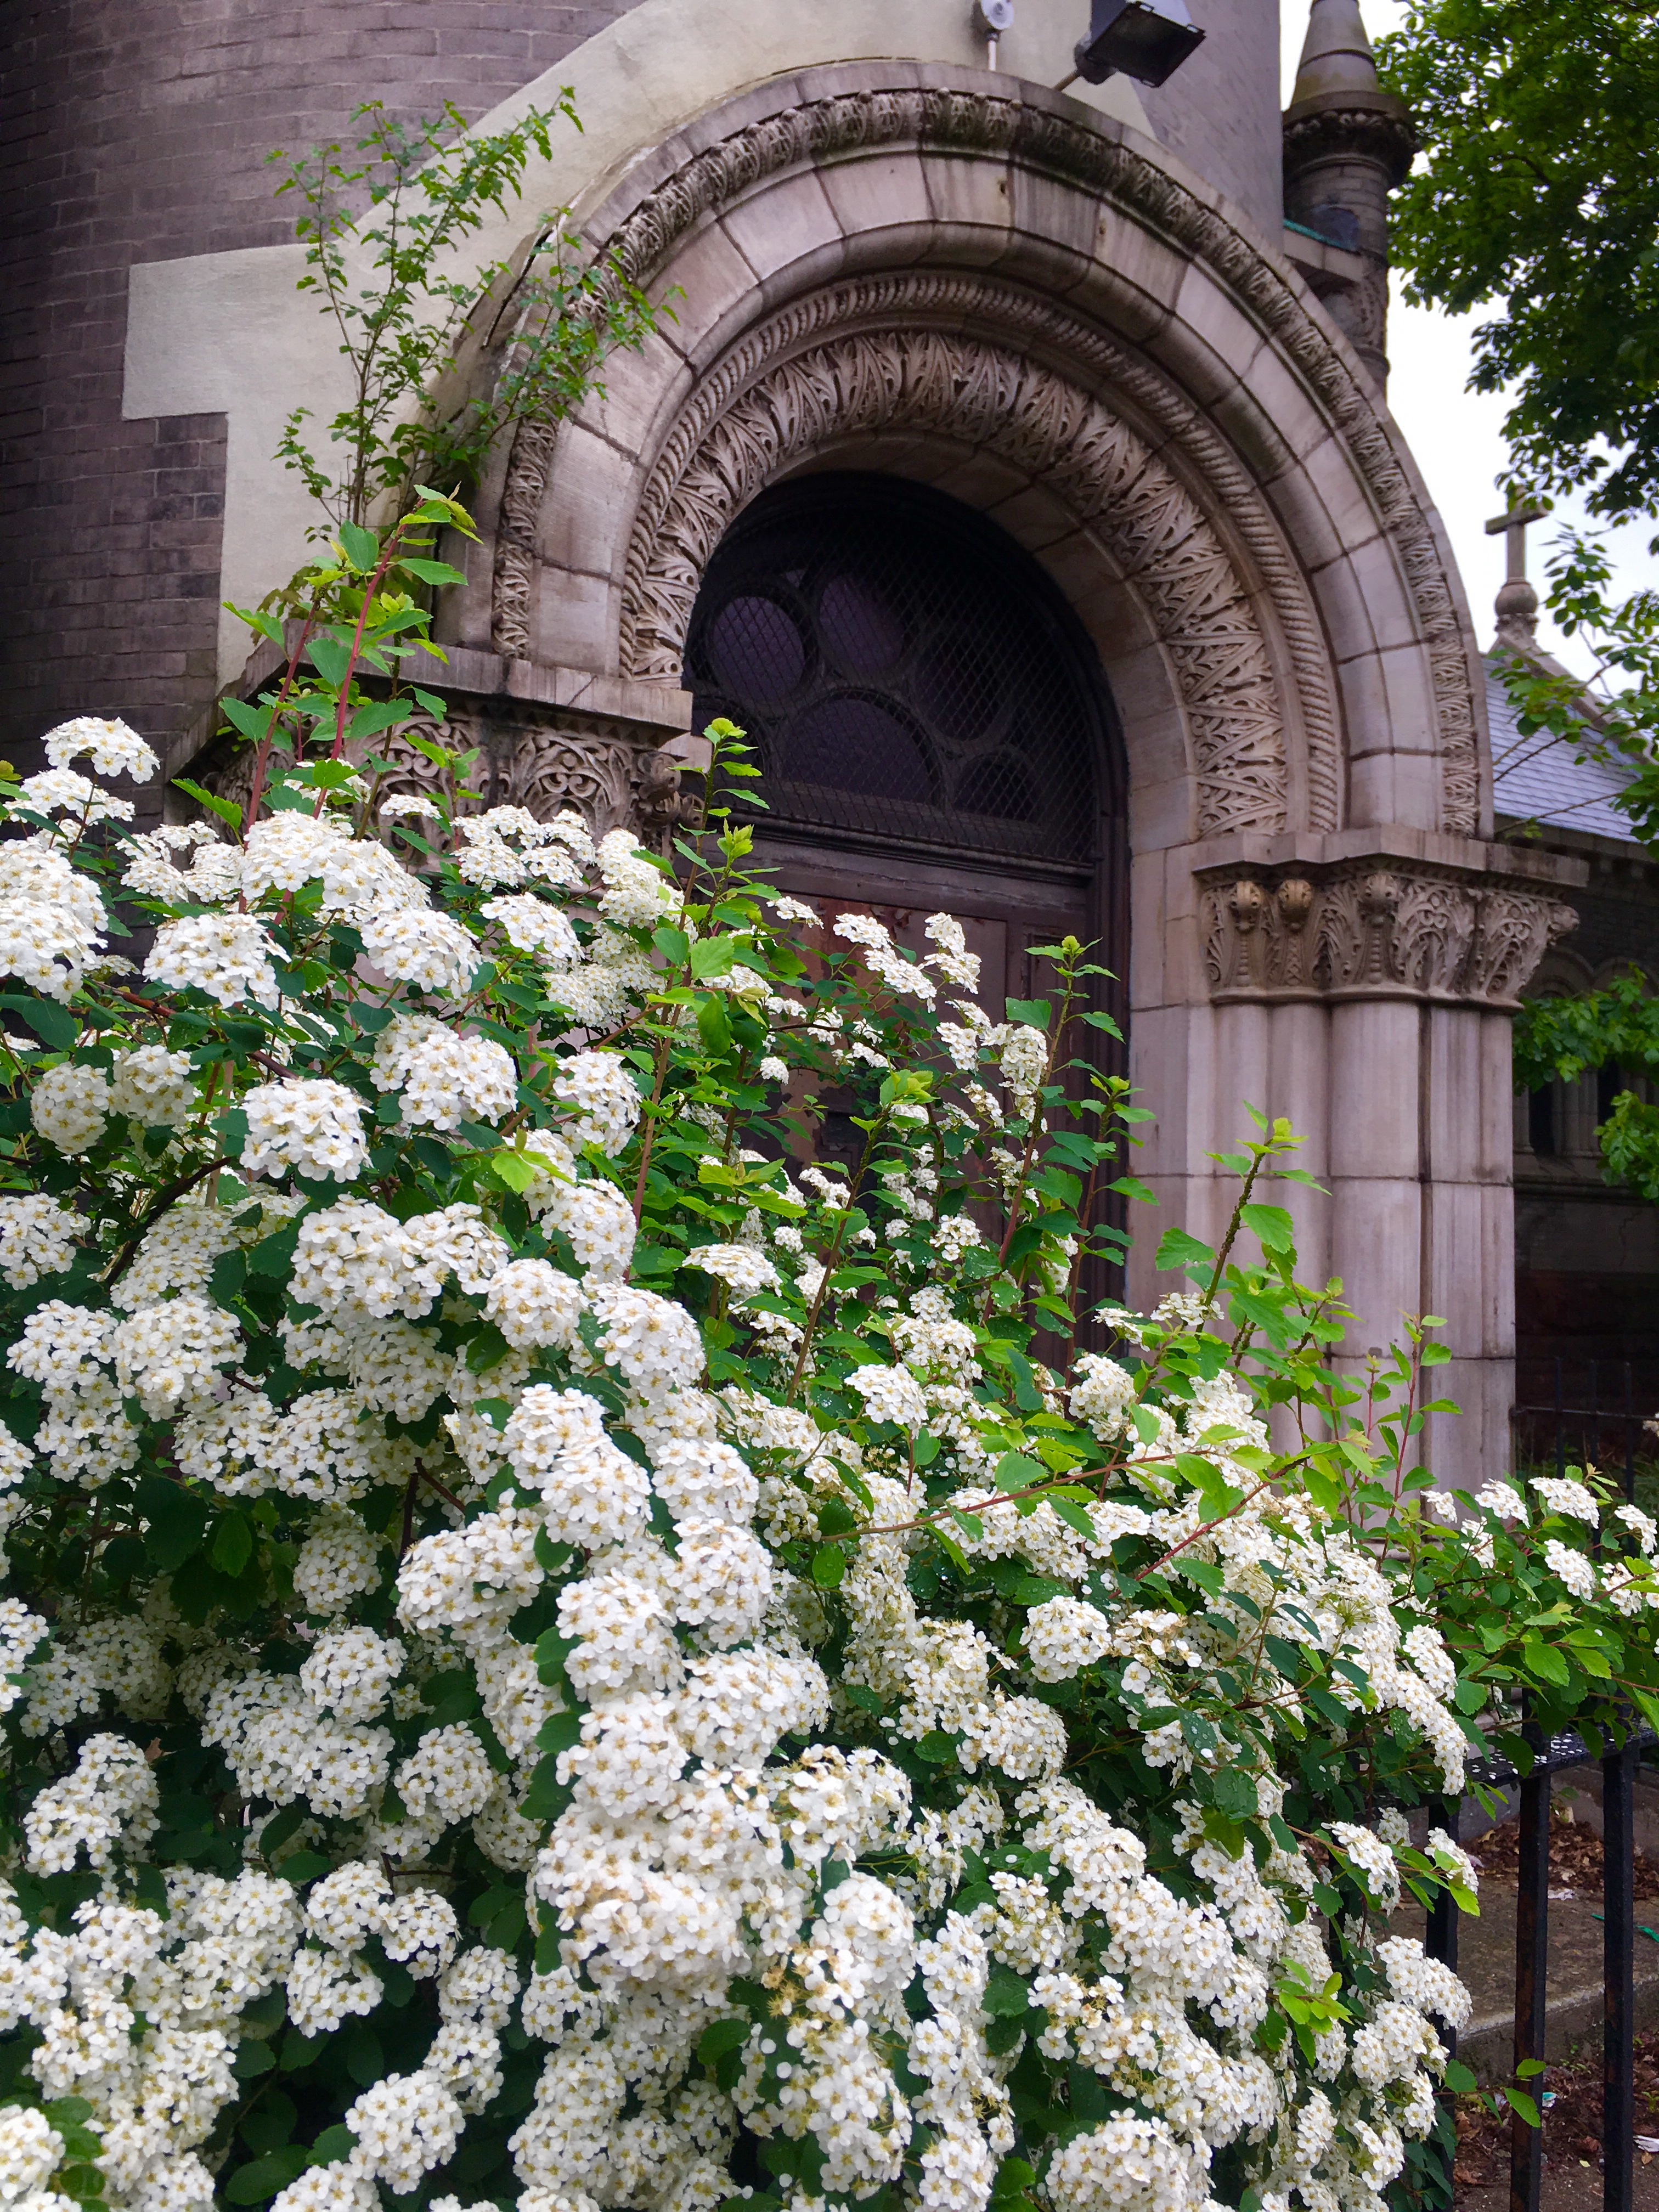 Flowers cascade in front of an arched doorway at the Church of St. Michael-St. Edward. Eagle photo by Lore Croghan